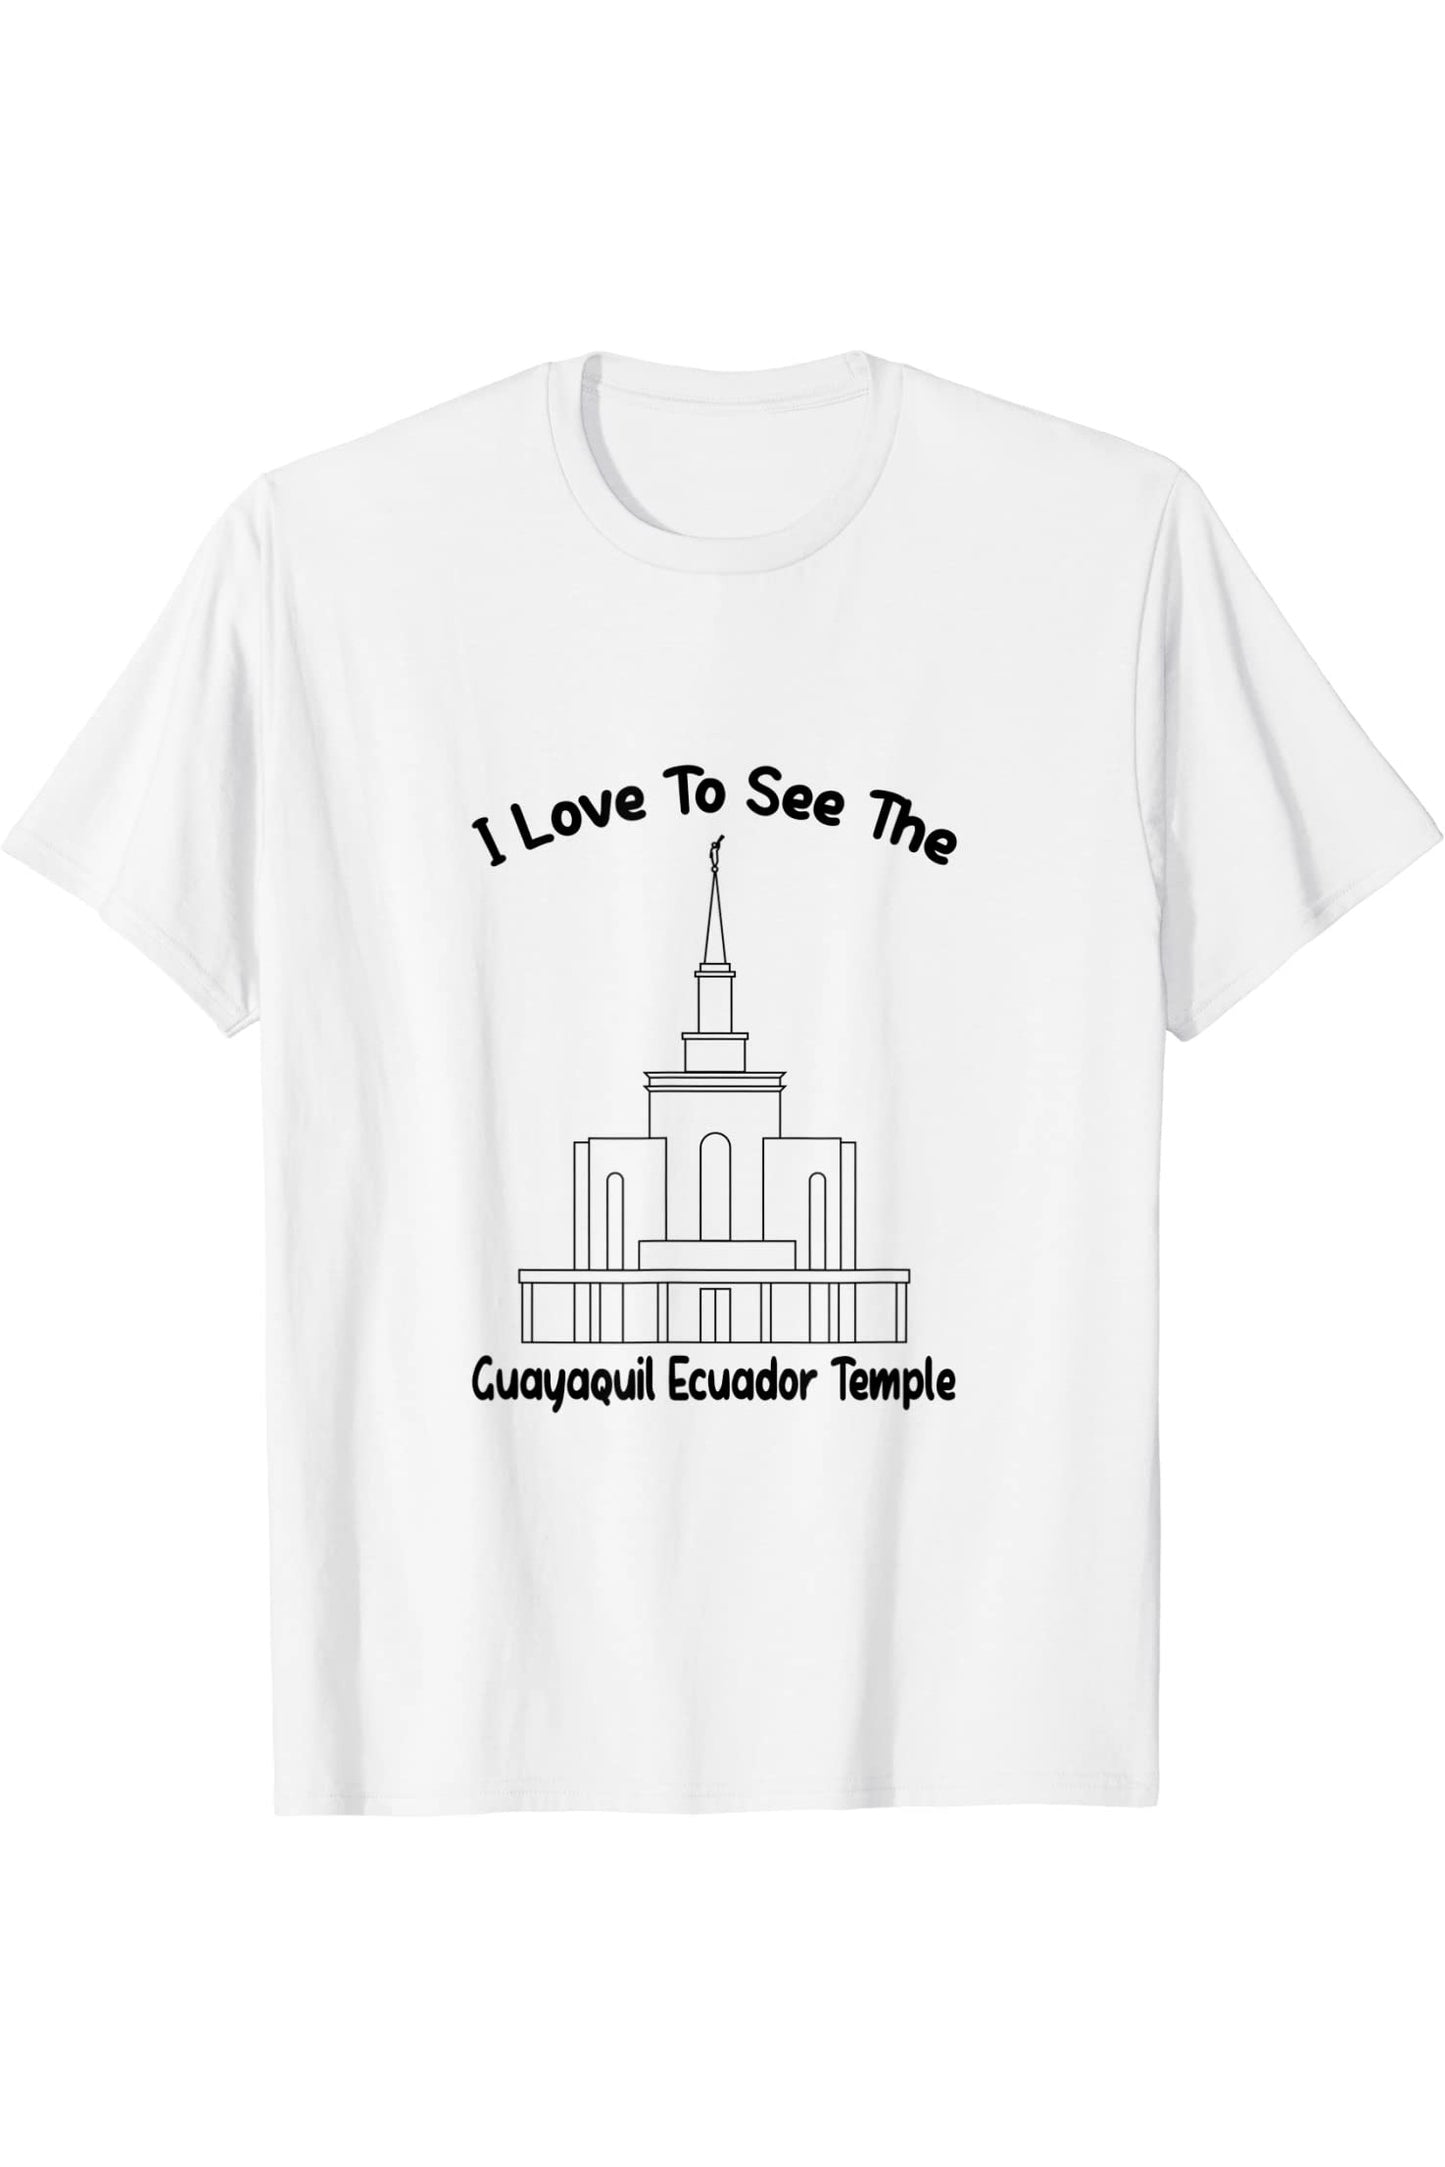 Guayaquil Ecuador Temple T-Shirt - Primary Style (English) US